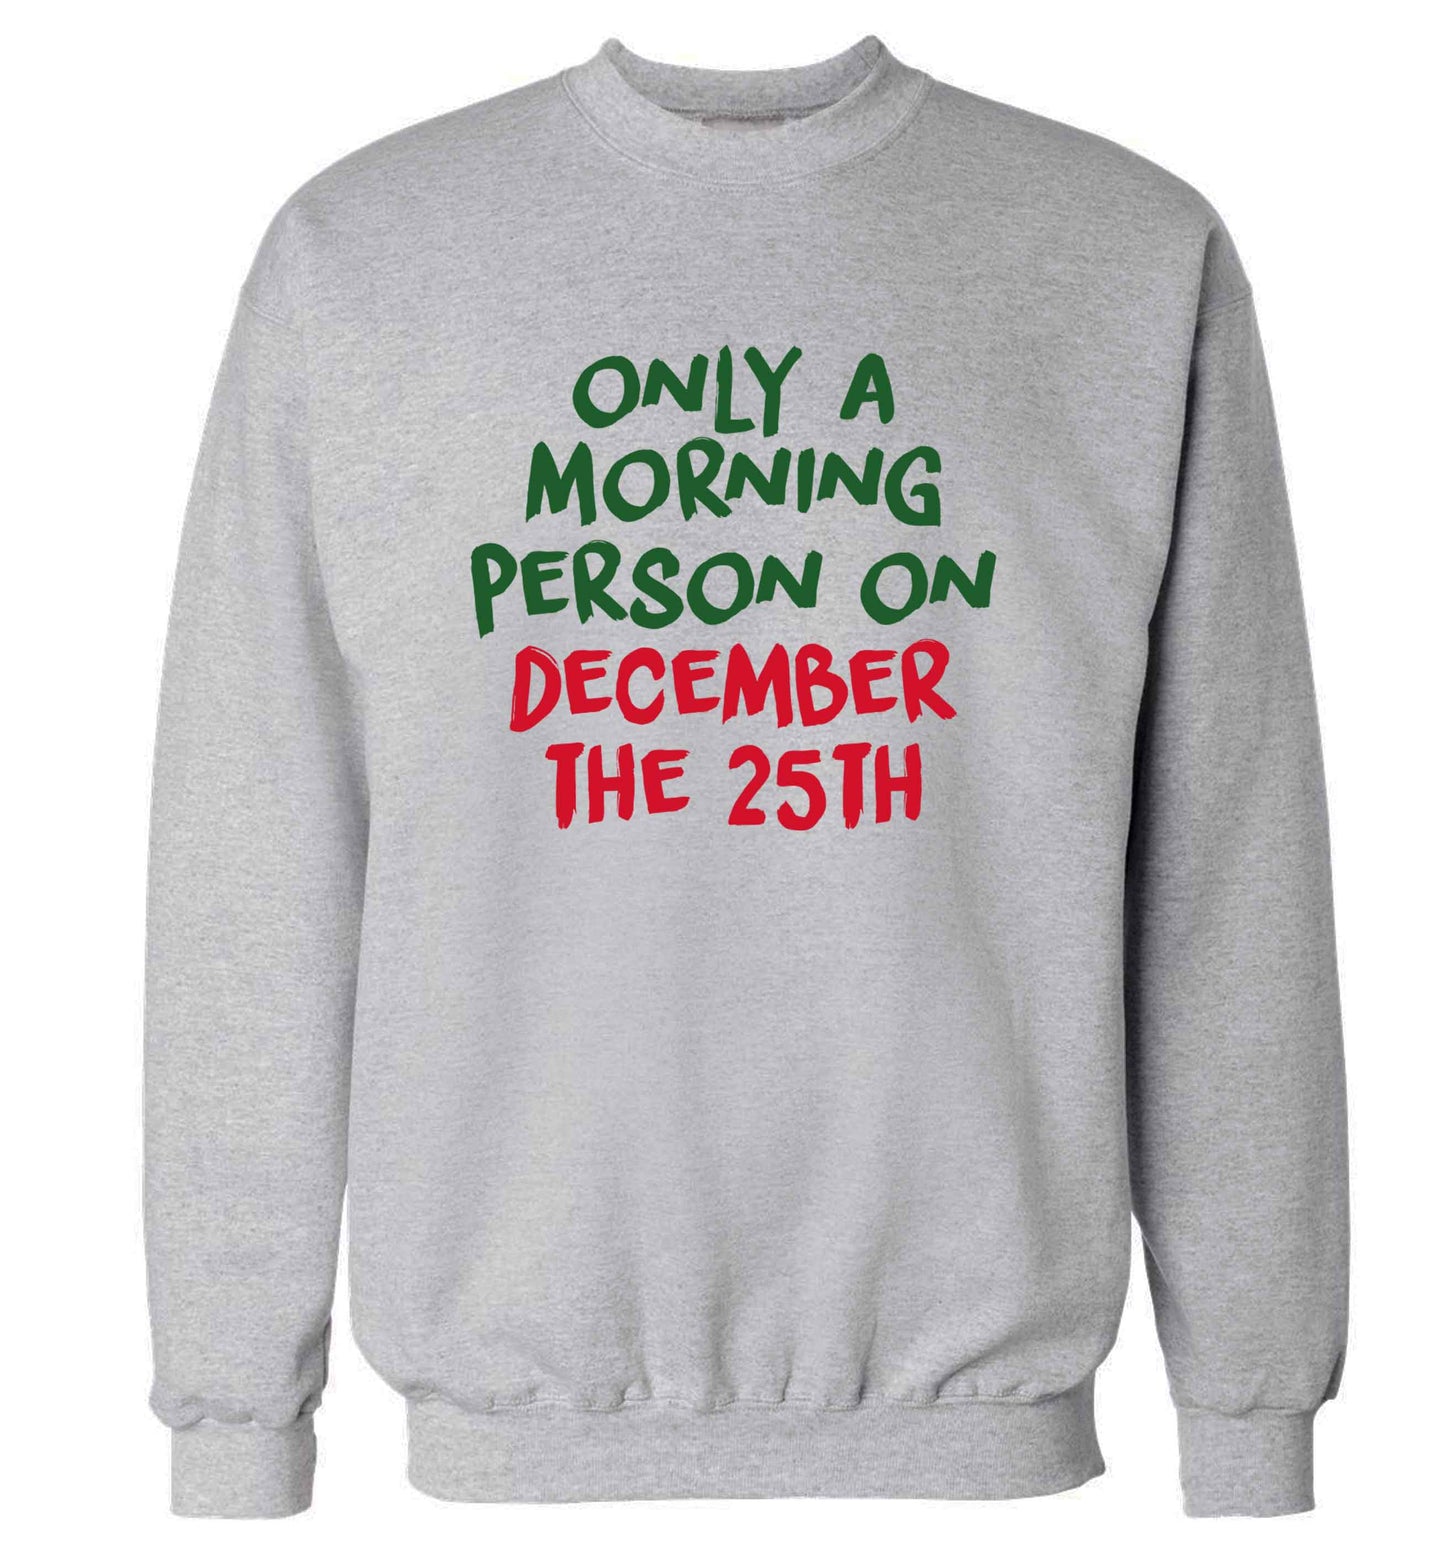 I'm only a morning person on December the 25th adult's unisex grey sweater 2XL